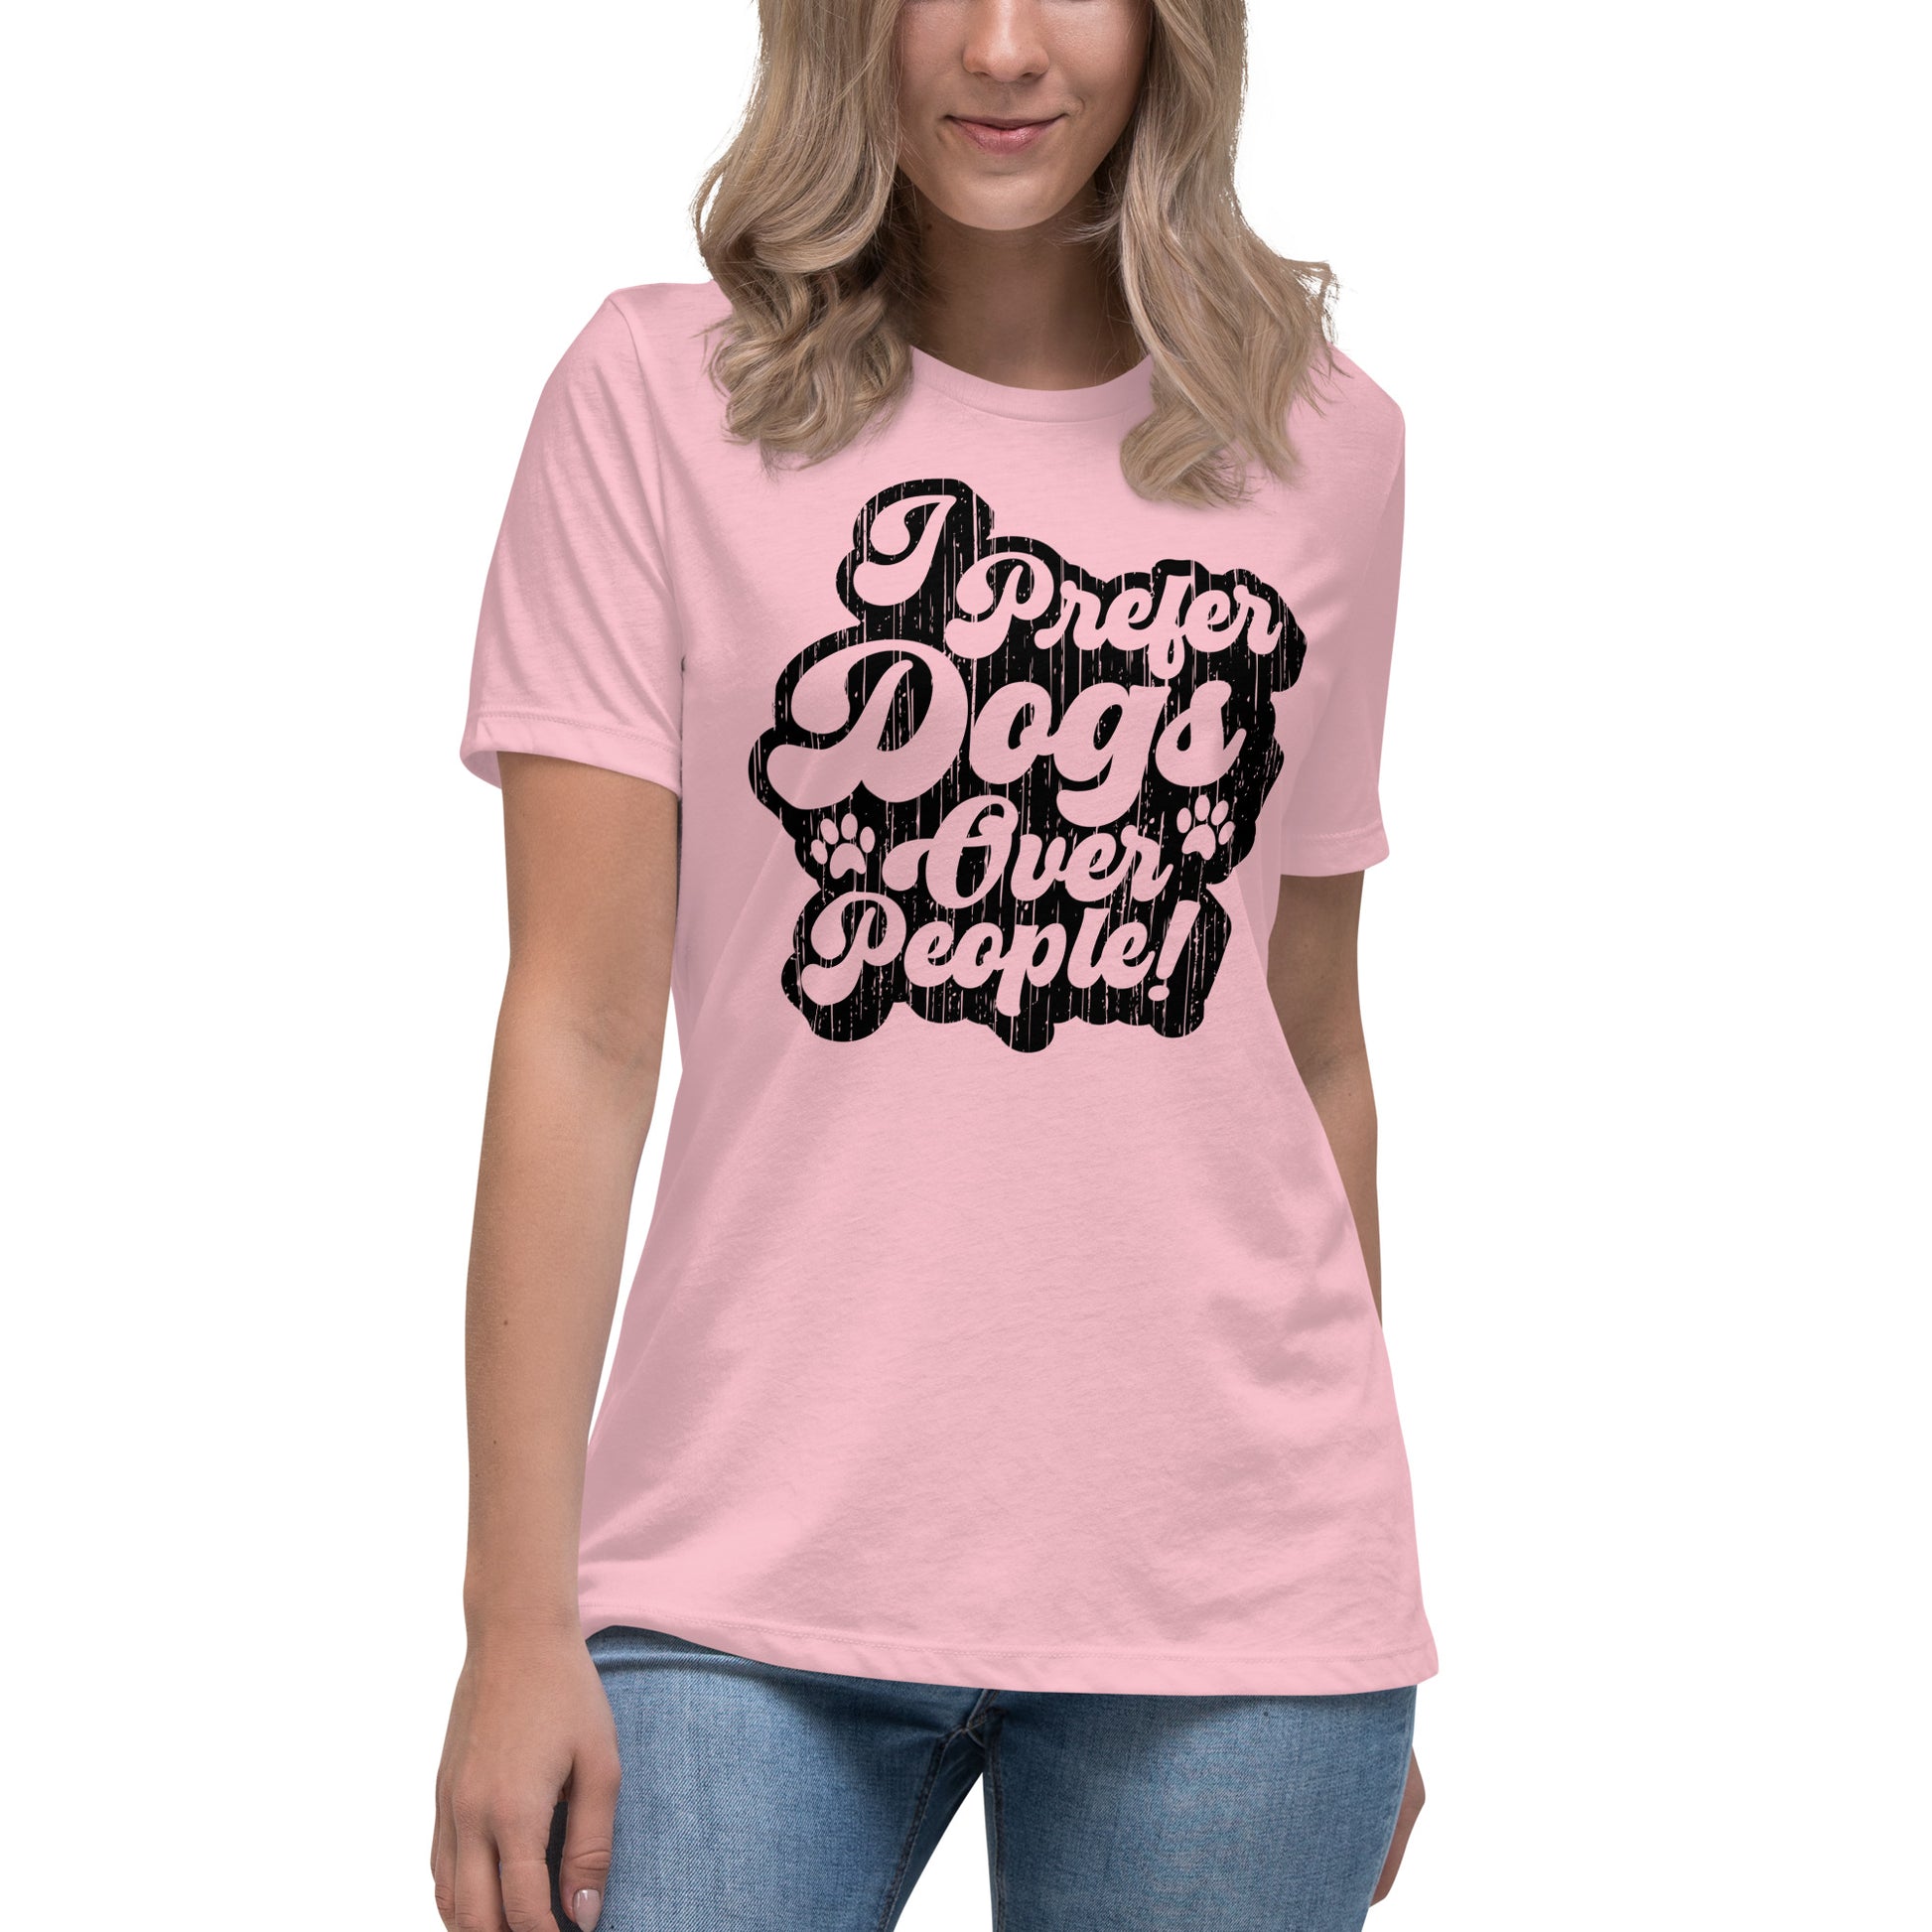 I prefer dogs over people women’s relaxed fit t-shirts by Dog Artistry pink color